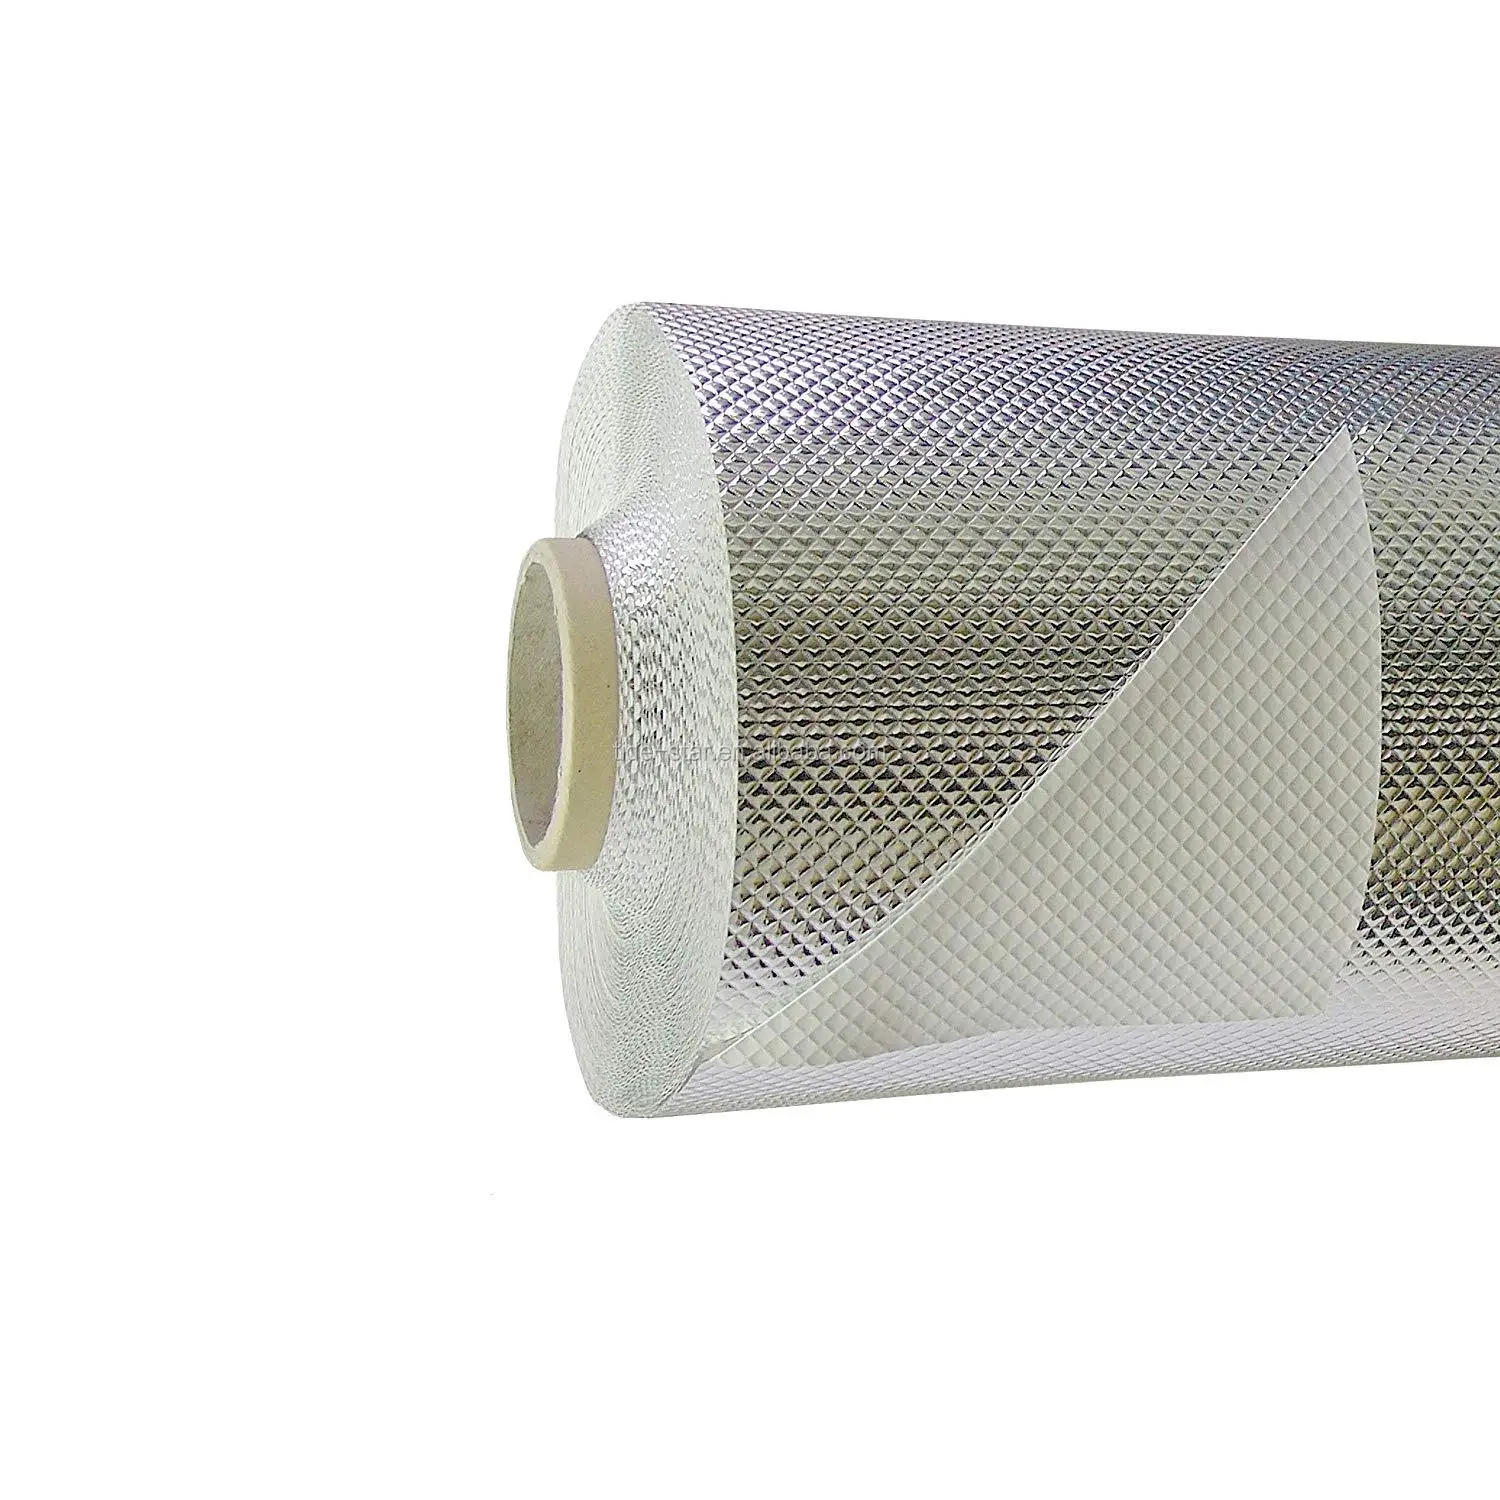 Black and White Mylar Sheeting for Indoor Grow Roll 20m x 2m Metre 